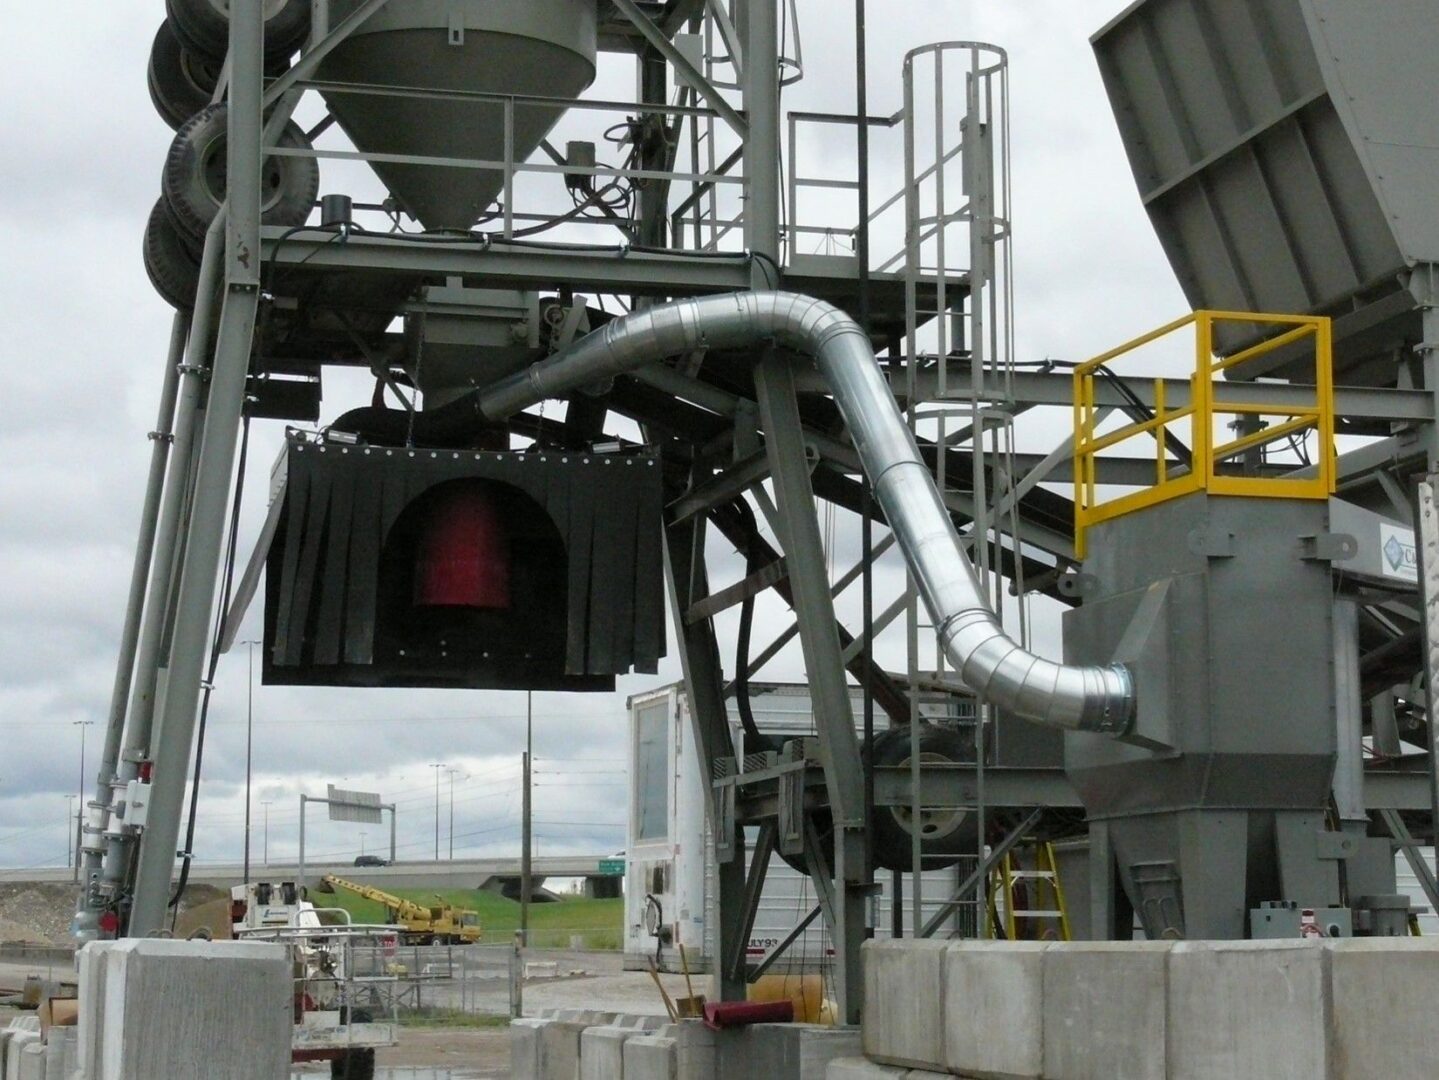 A cement plant with pipes and a large bag of cement.